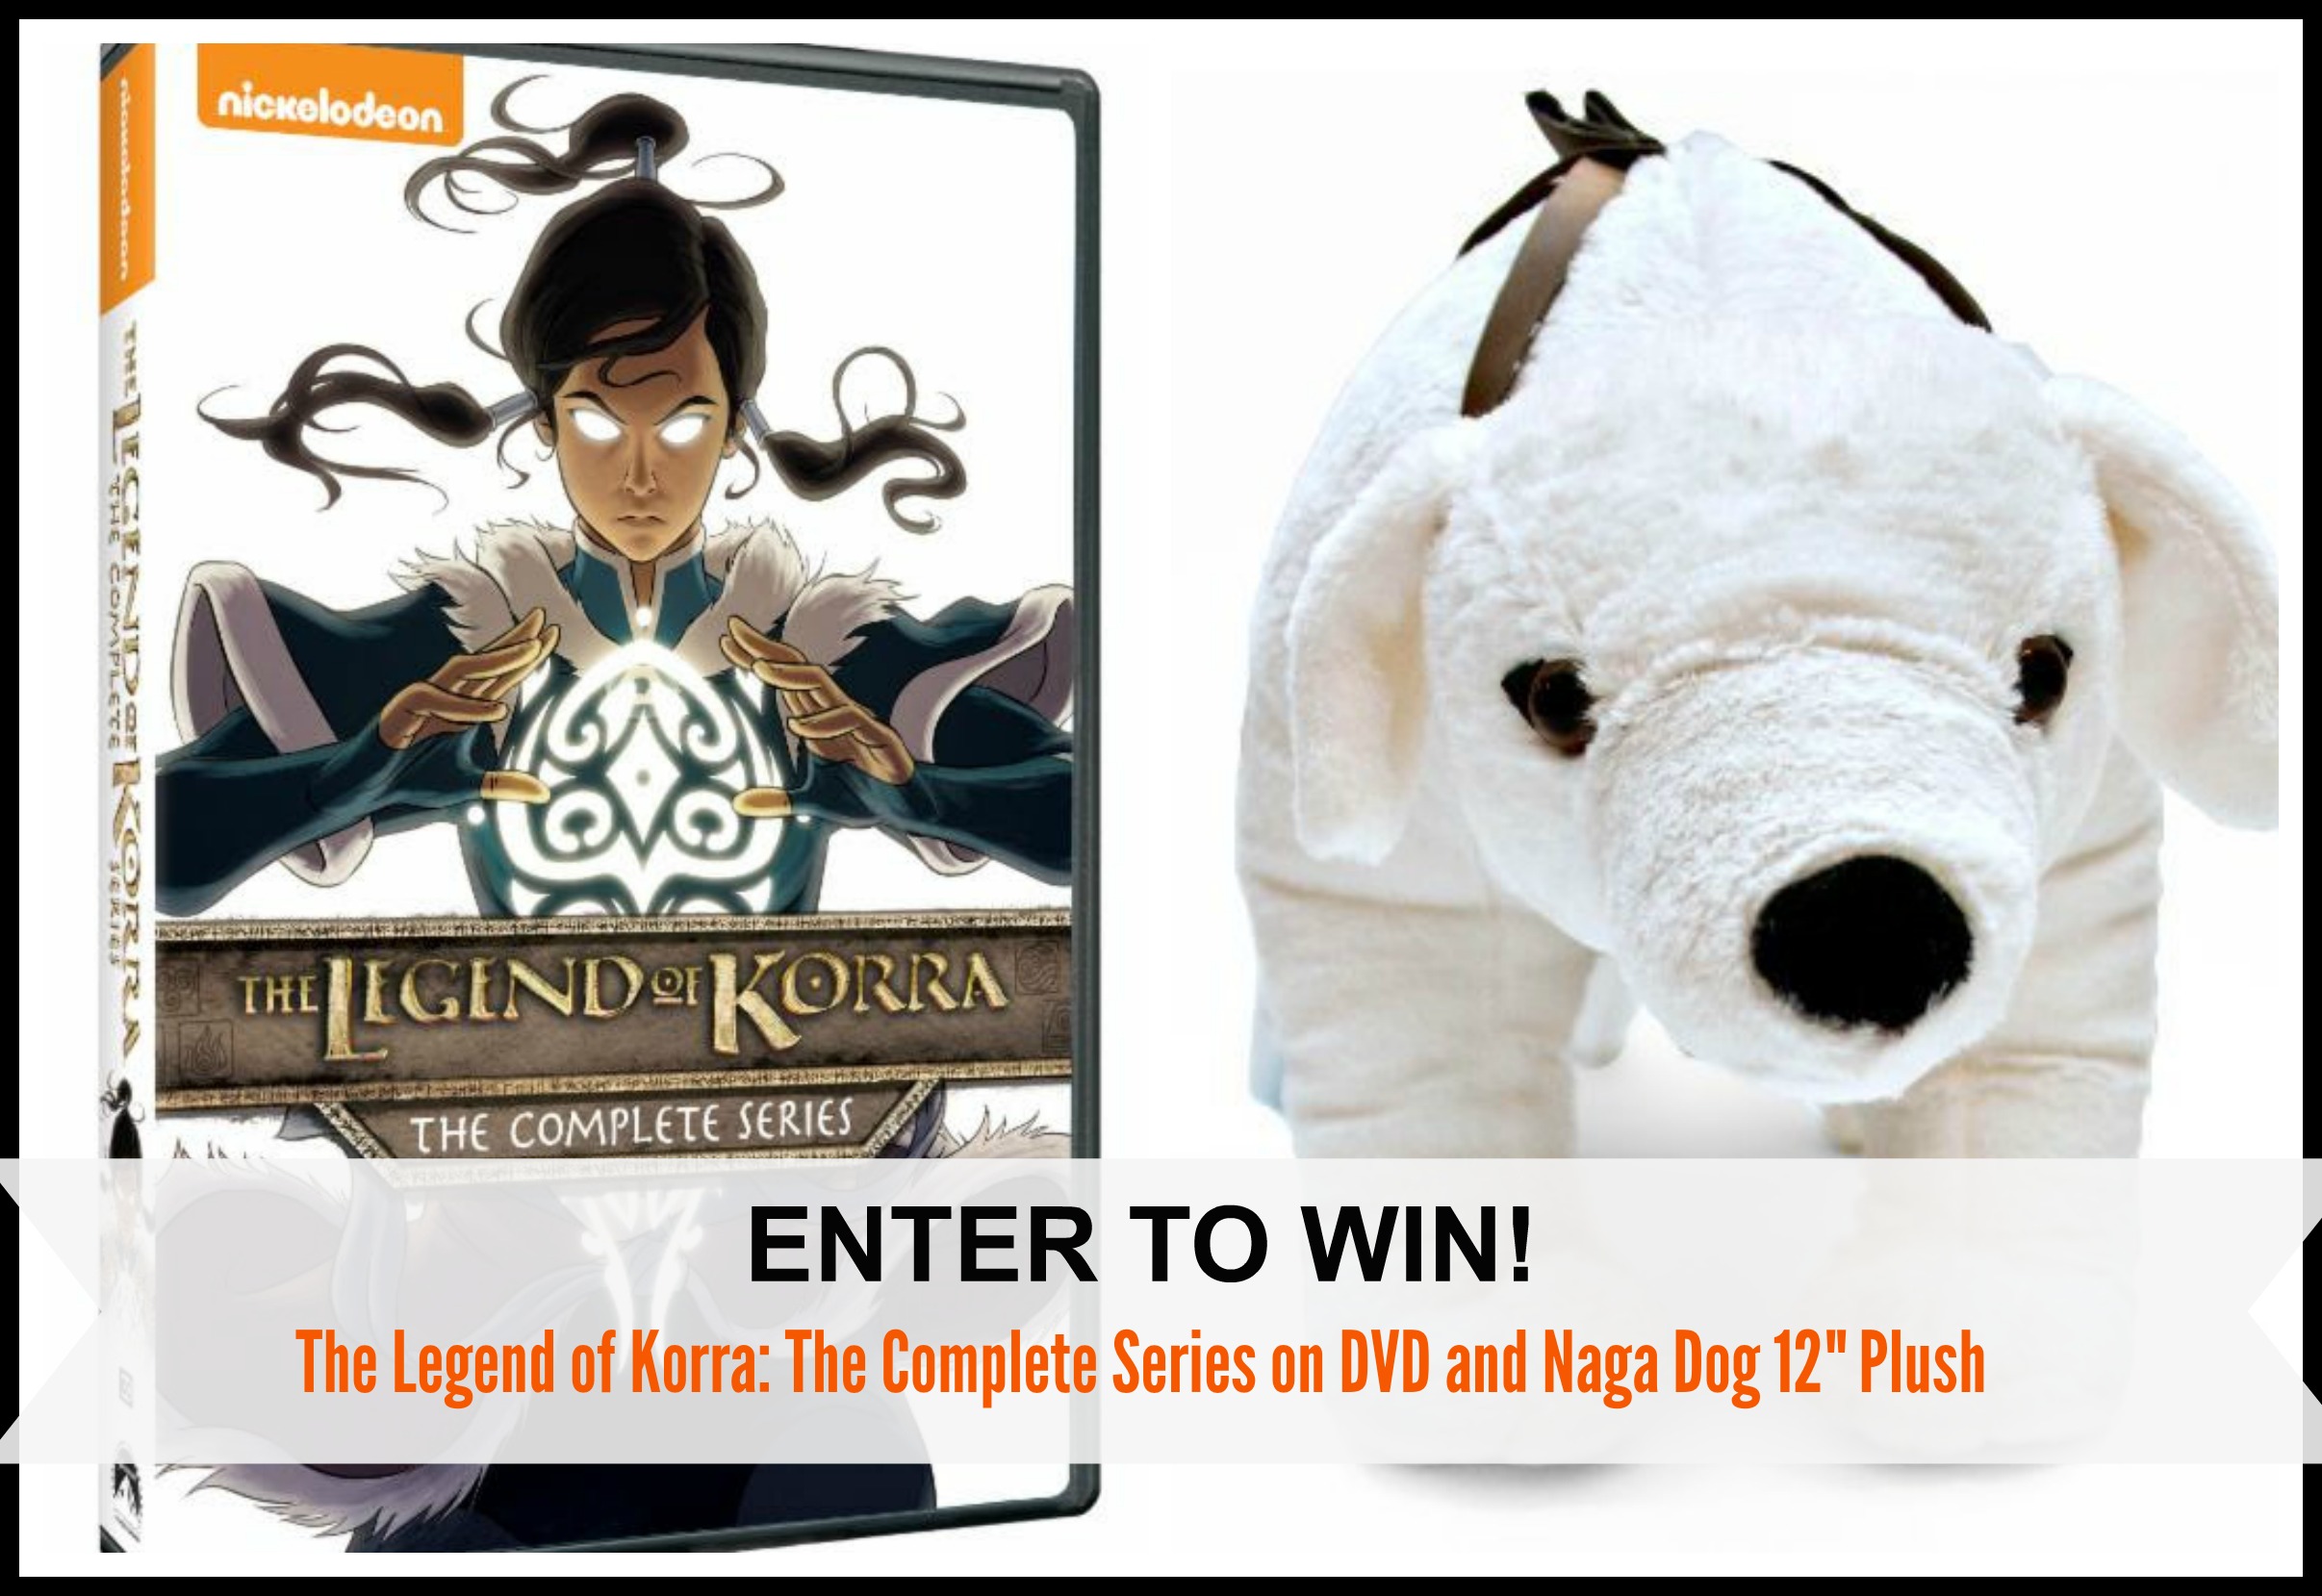 Enter to Win The Legend of Korra: The Complete Series on DVD and Naga Dog 12" Plush #Giveaway